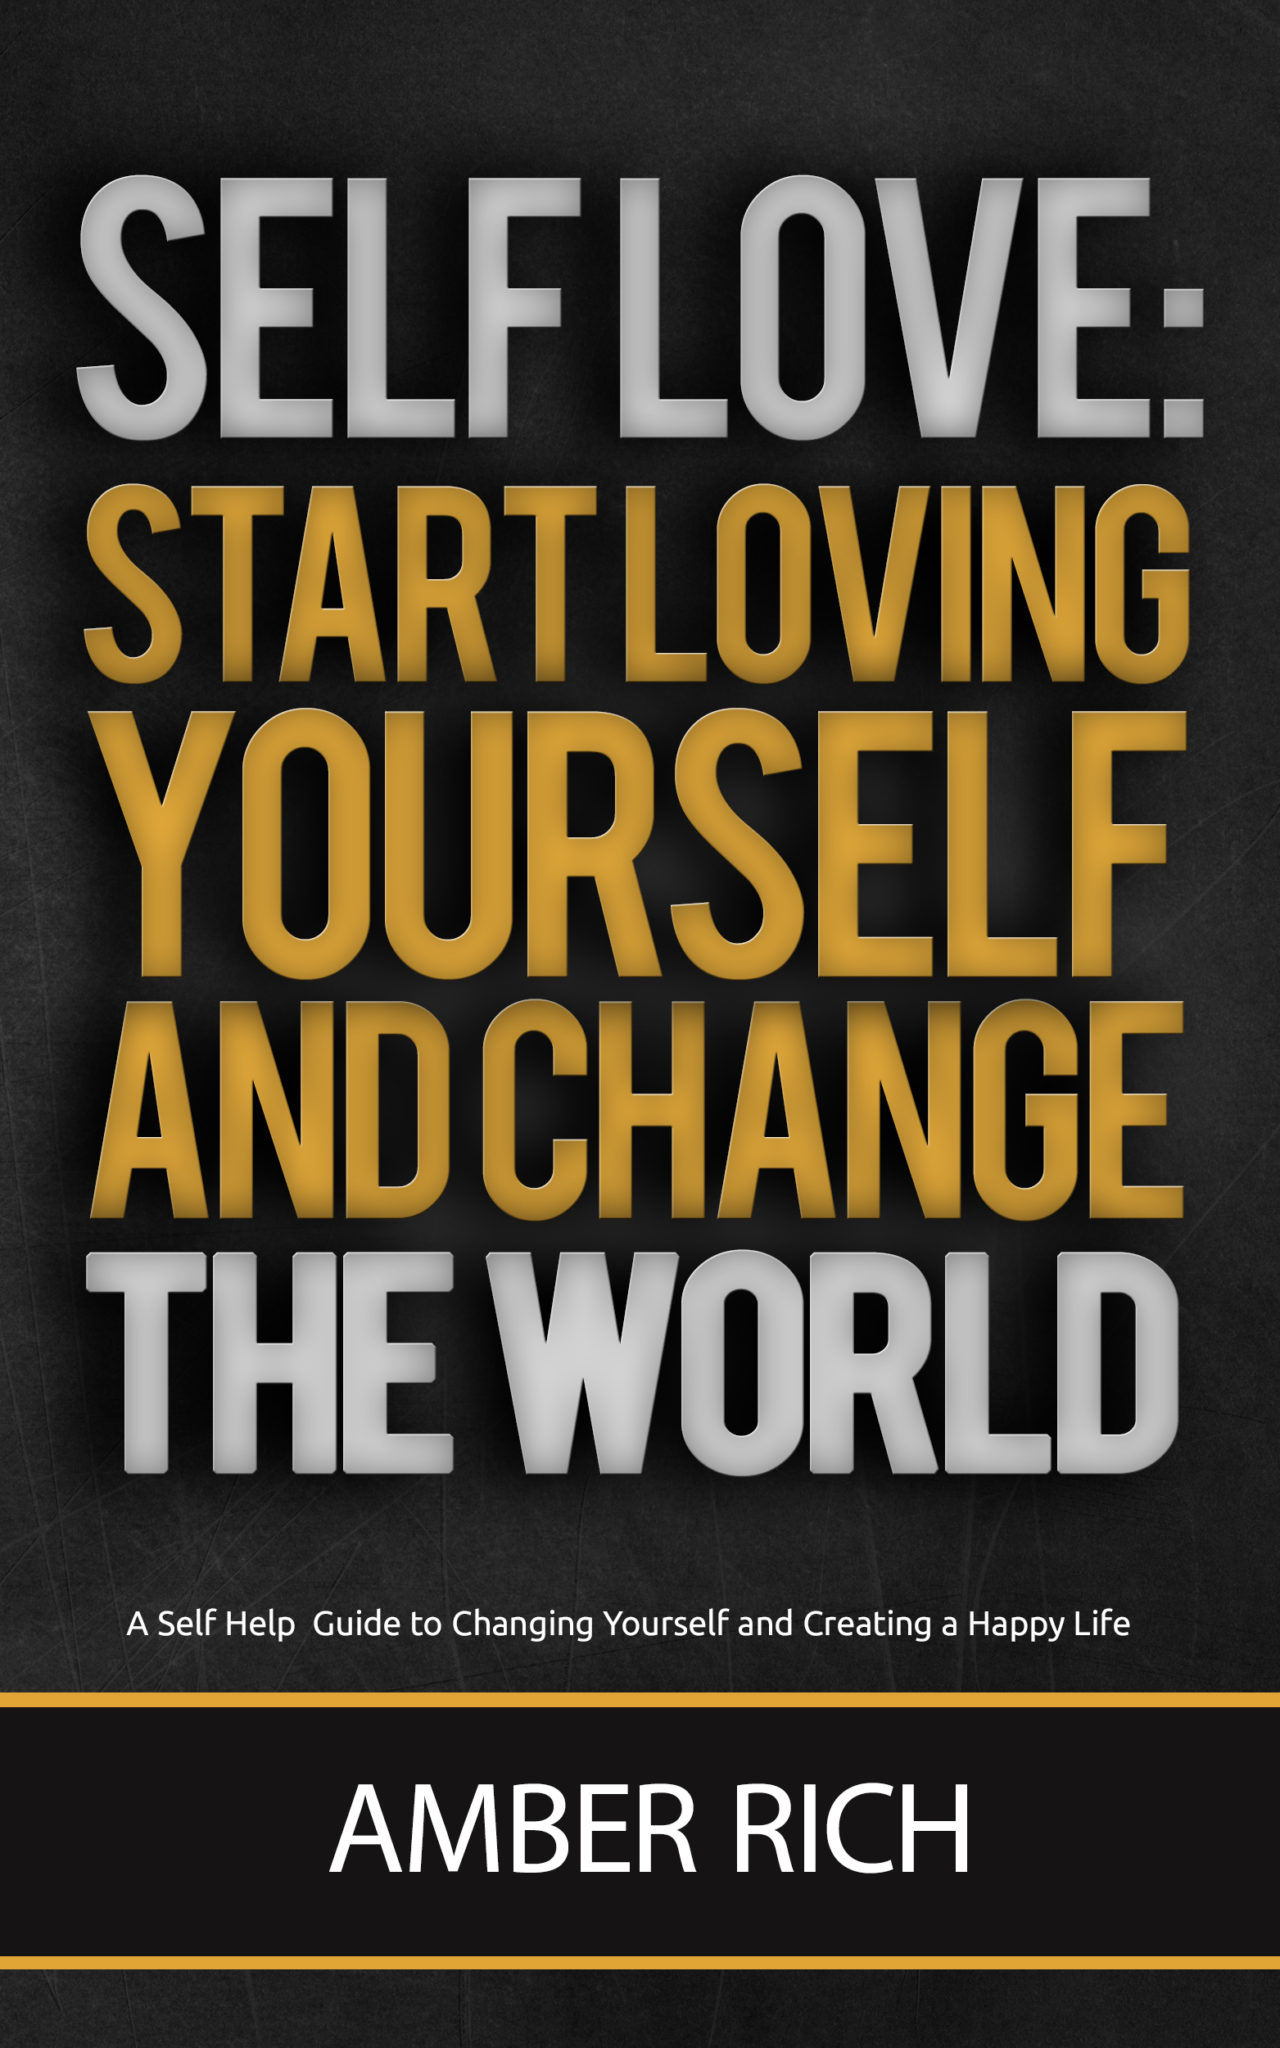 FREE: Self-Love: Start Loving Yourself and Change the World: A Self-Help Guide to Changing Yourself and Creating a Happy Life by Amber Rich